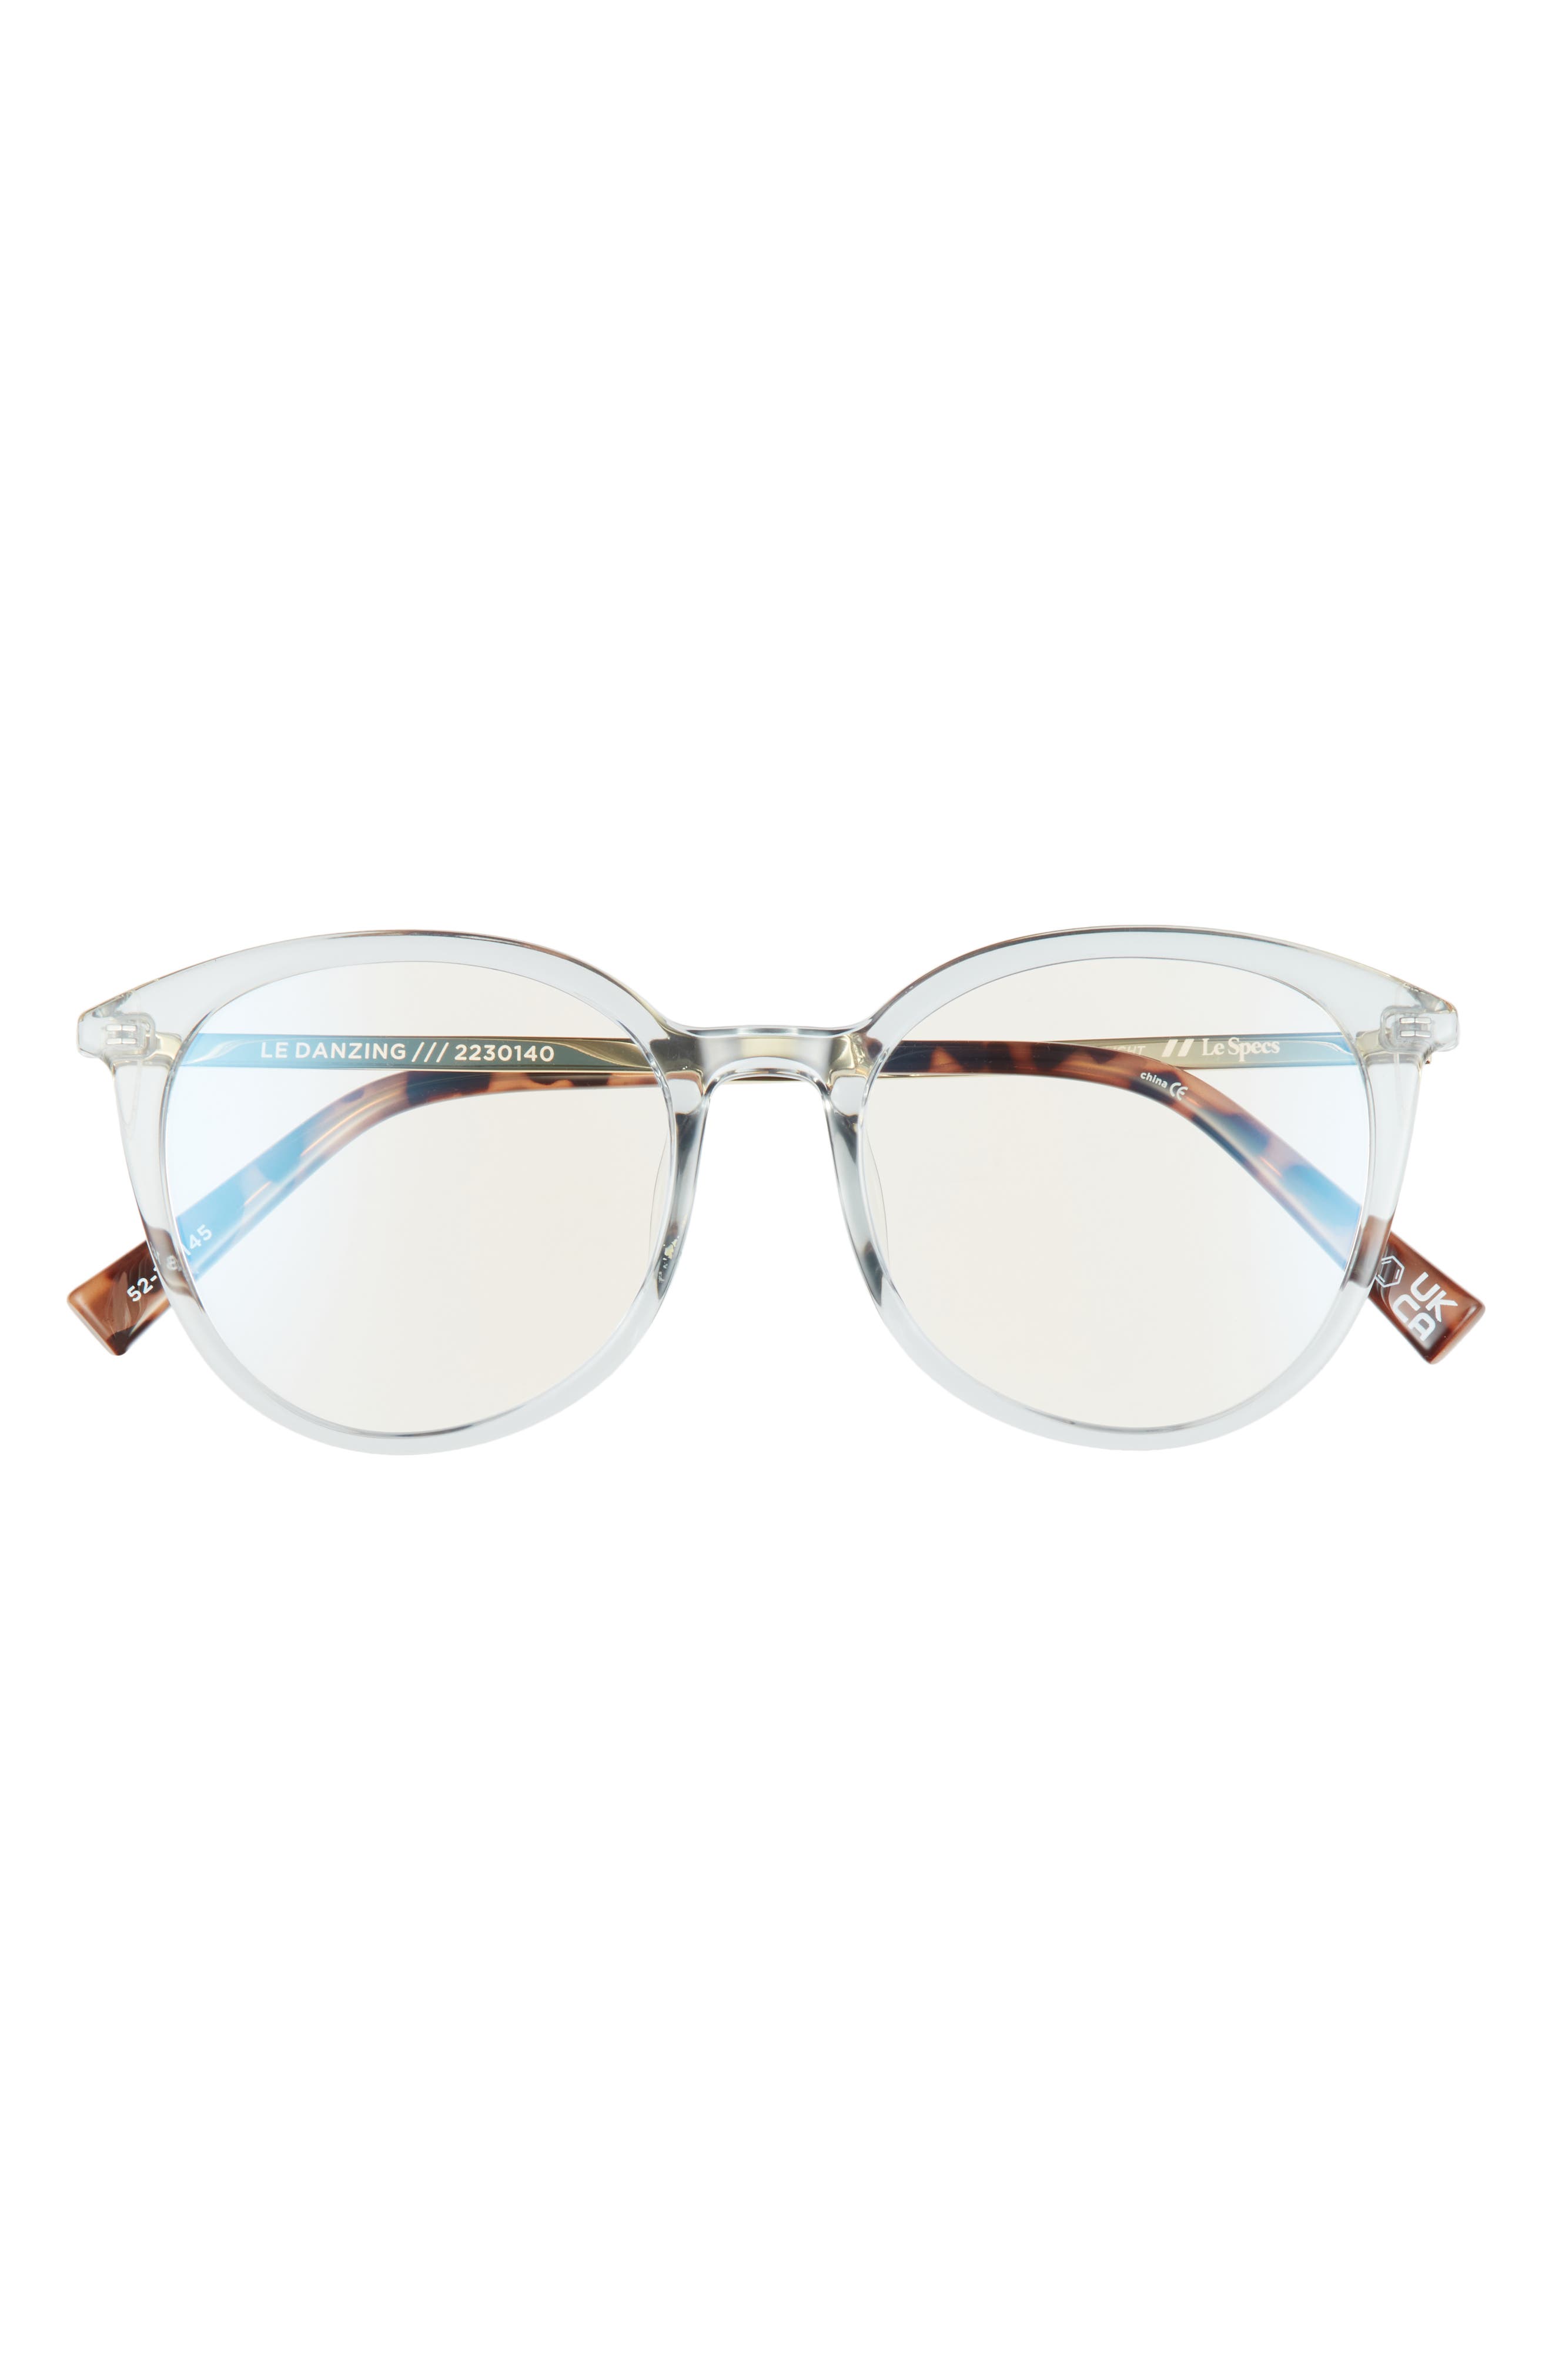 Le Specs Le Danzing 52mm Round Blue Light Blocking Glasses in Grey/Gold/Anti Blue Light at Nordstrom